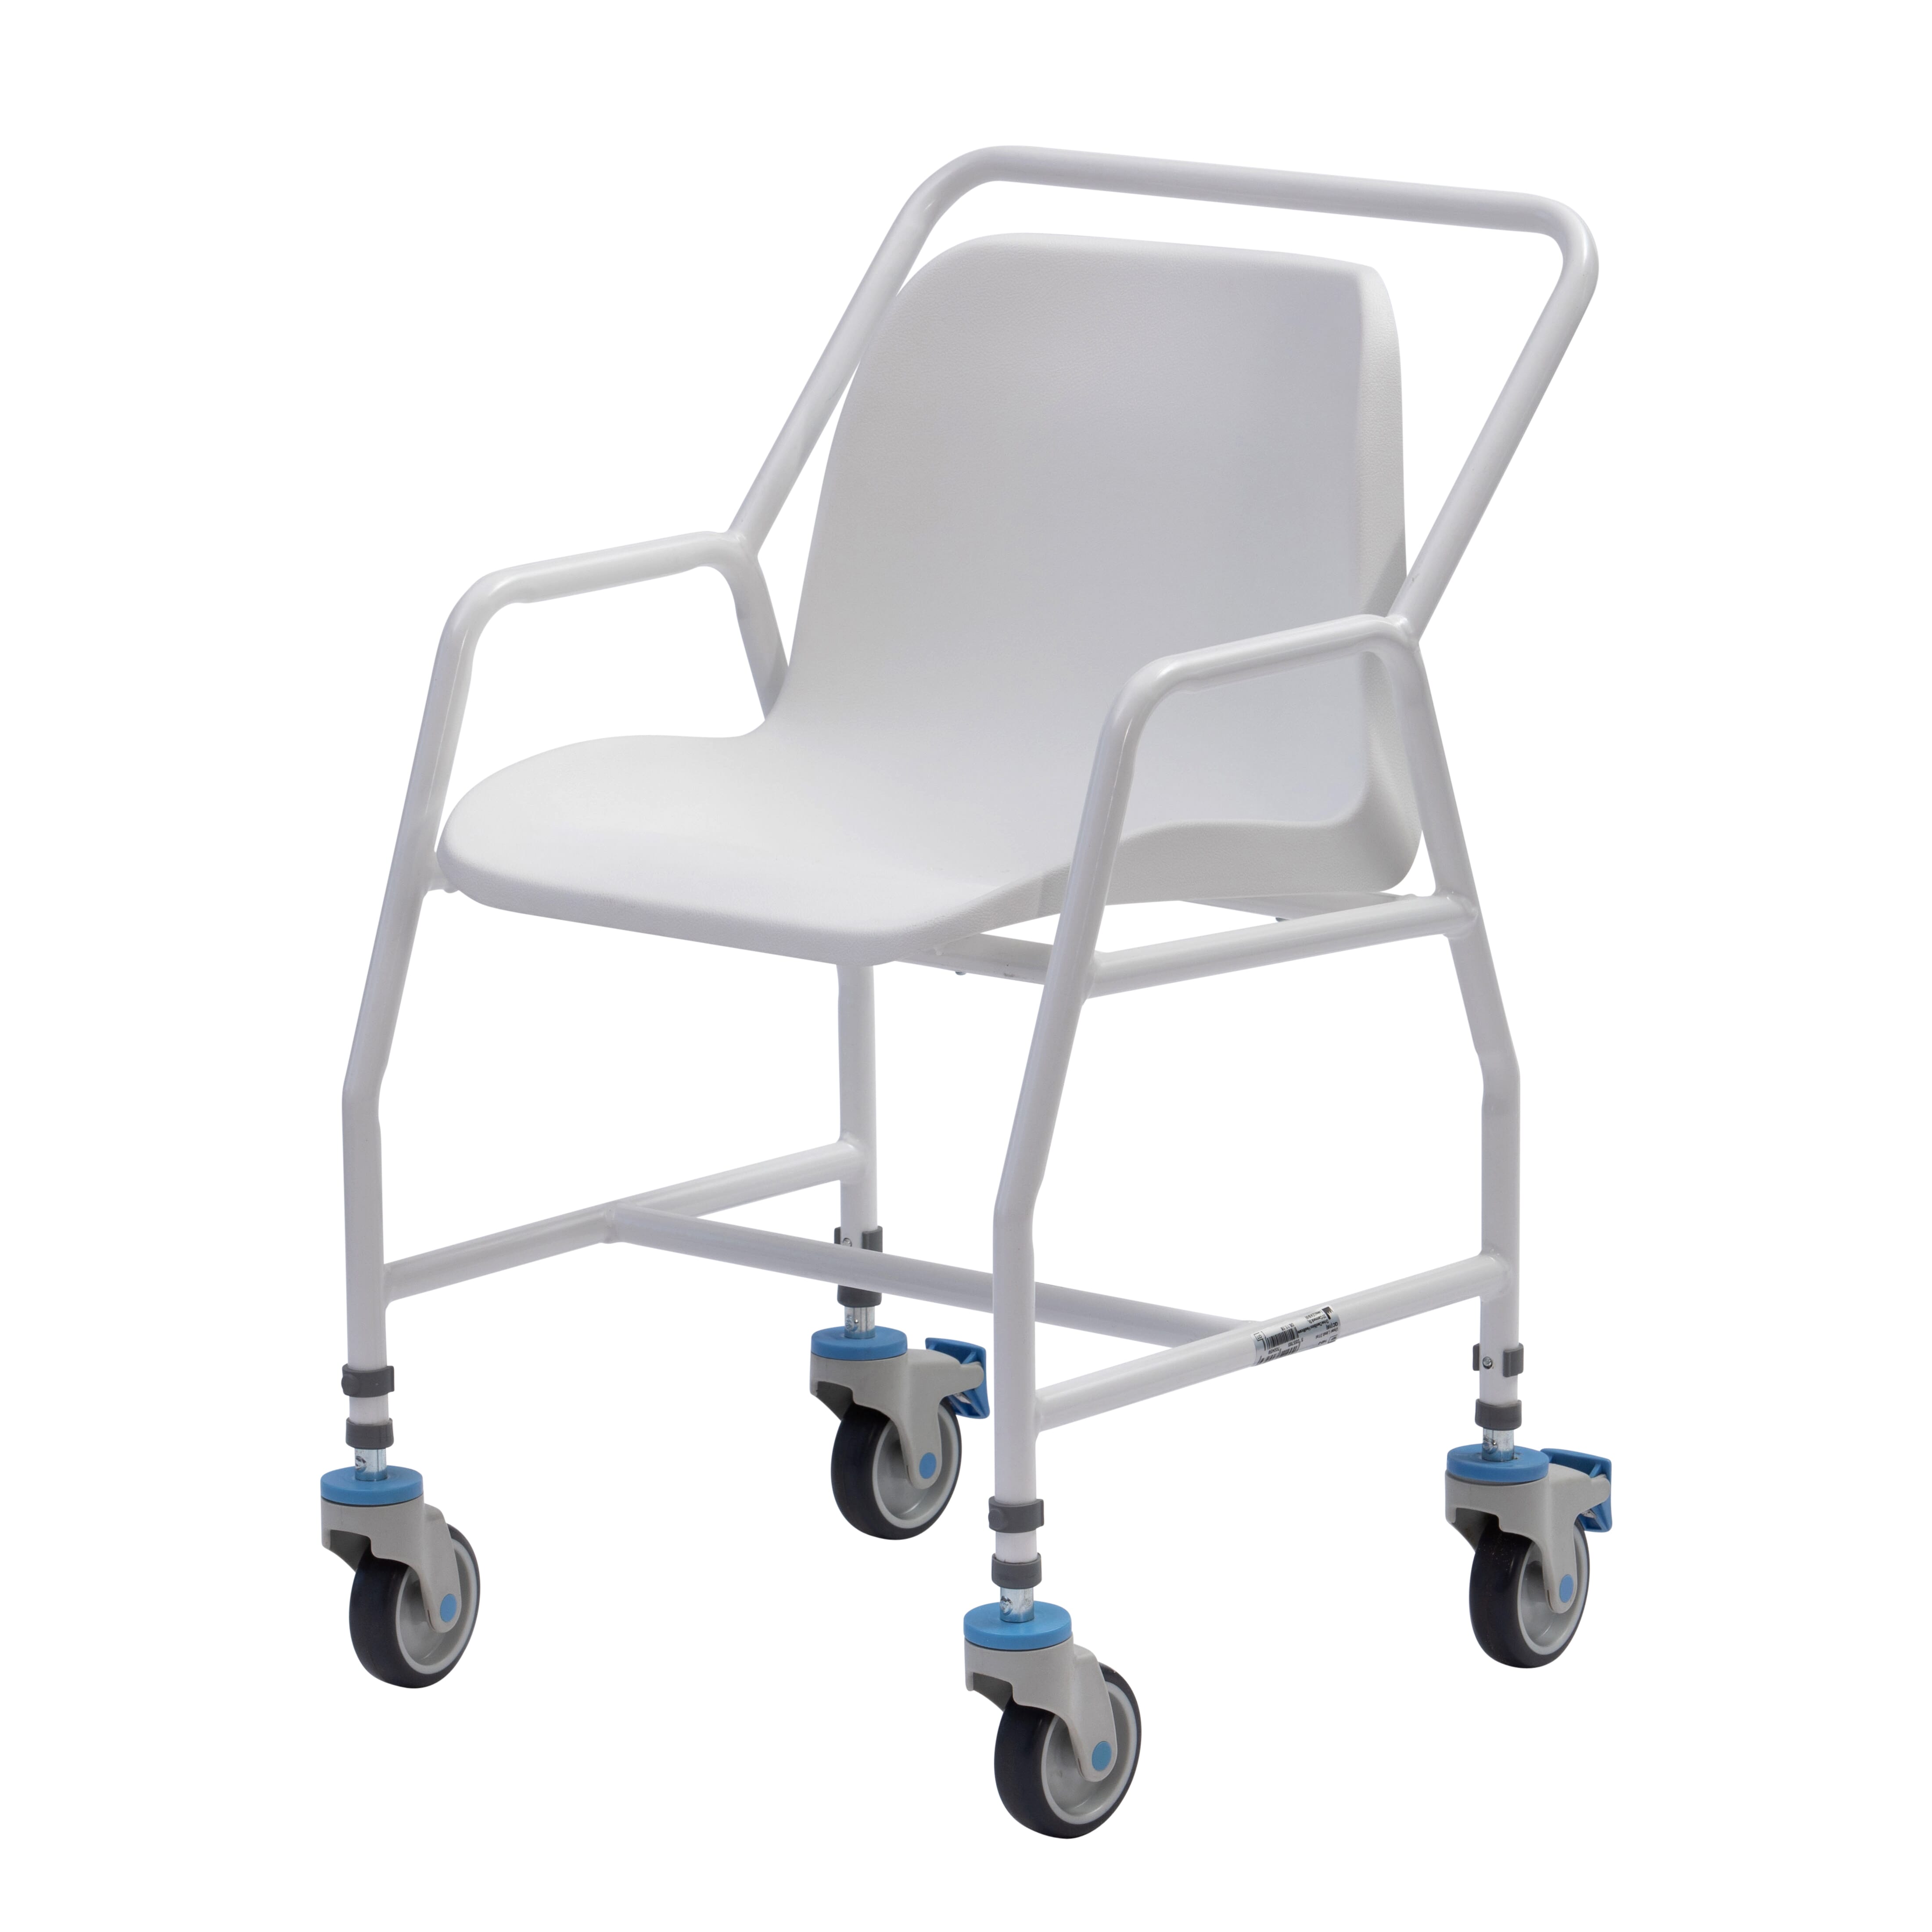 View Tilton Mobile Adjustable Height Shower Chair 2 Brake with Fixed Arms information